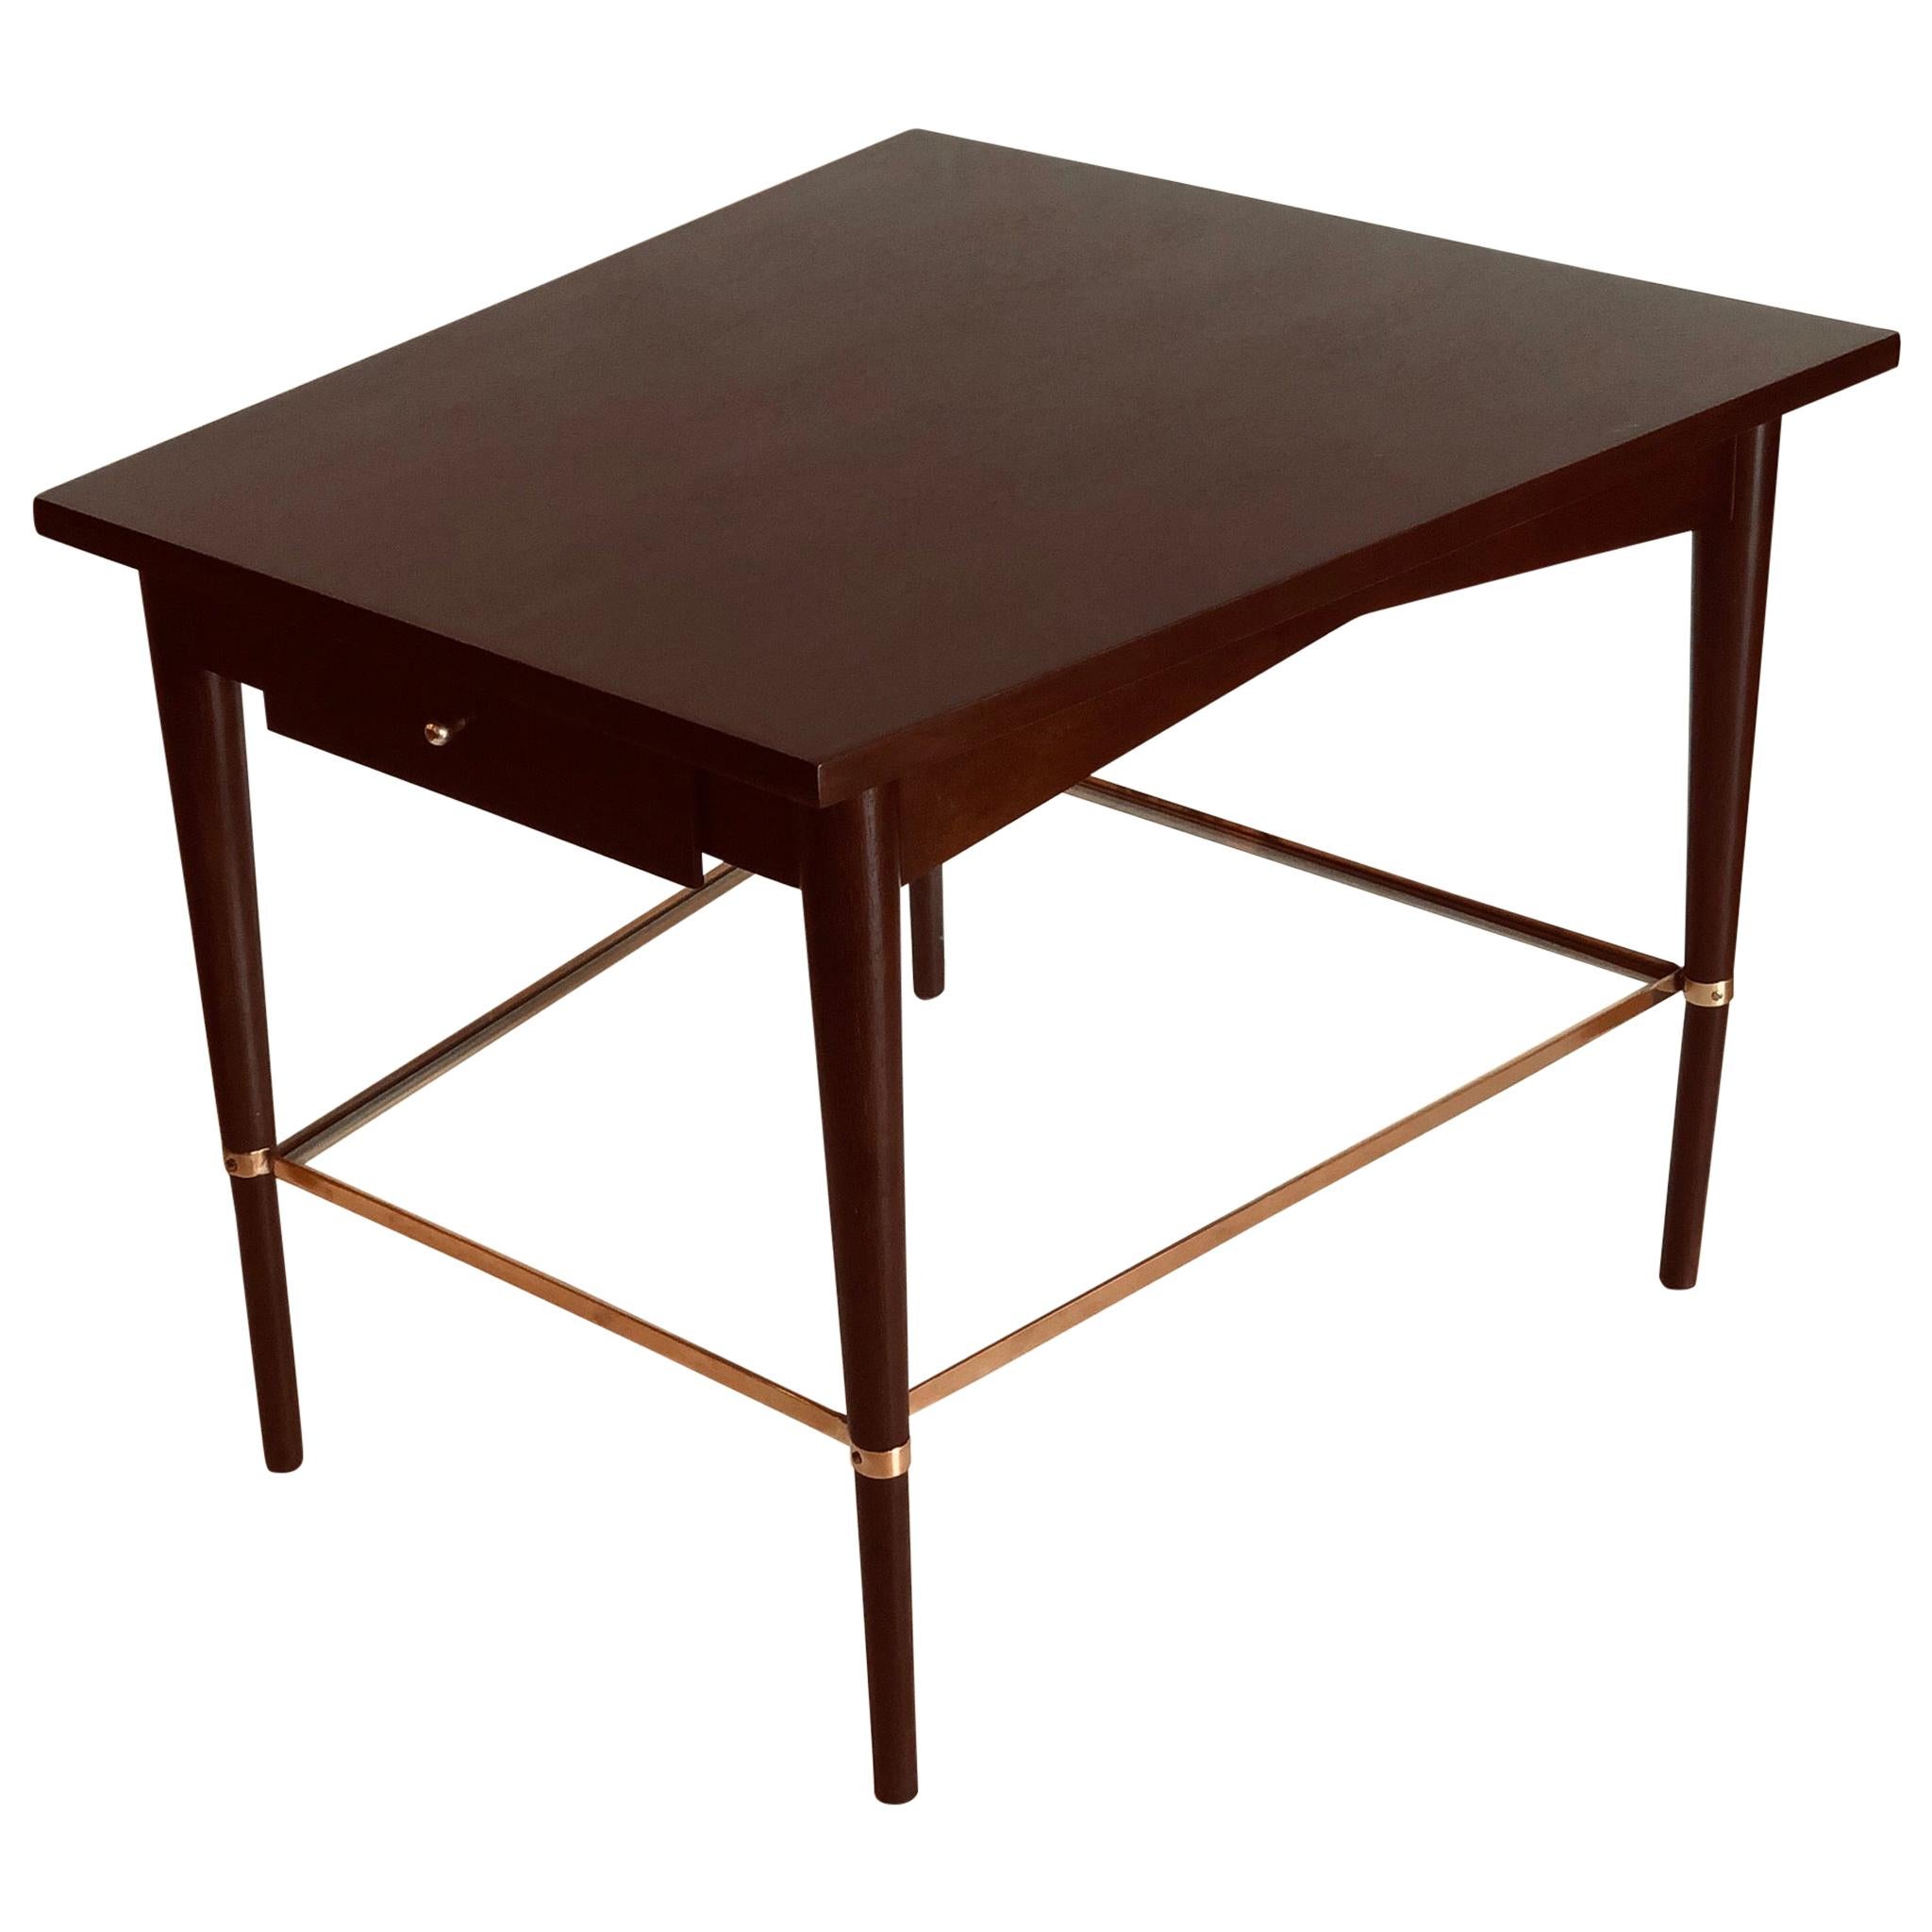 Midcentury Paul McCobb Wedge Table Mod.7014, Connoisseur Collection